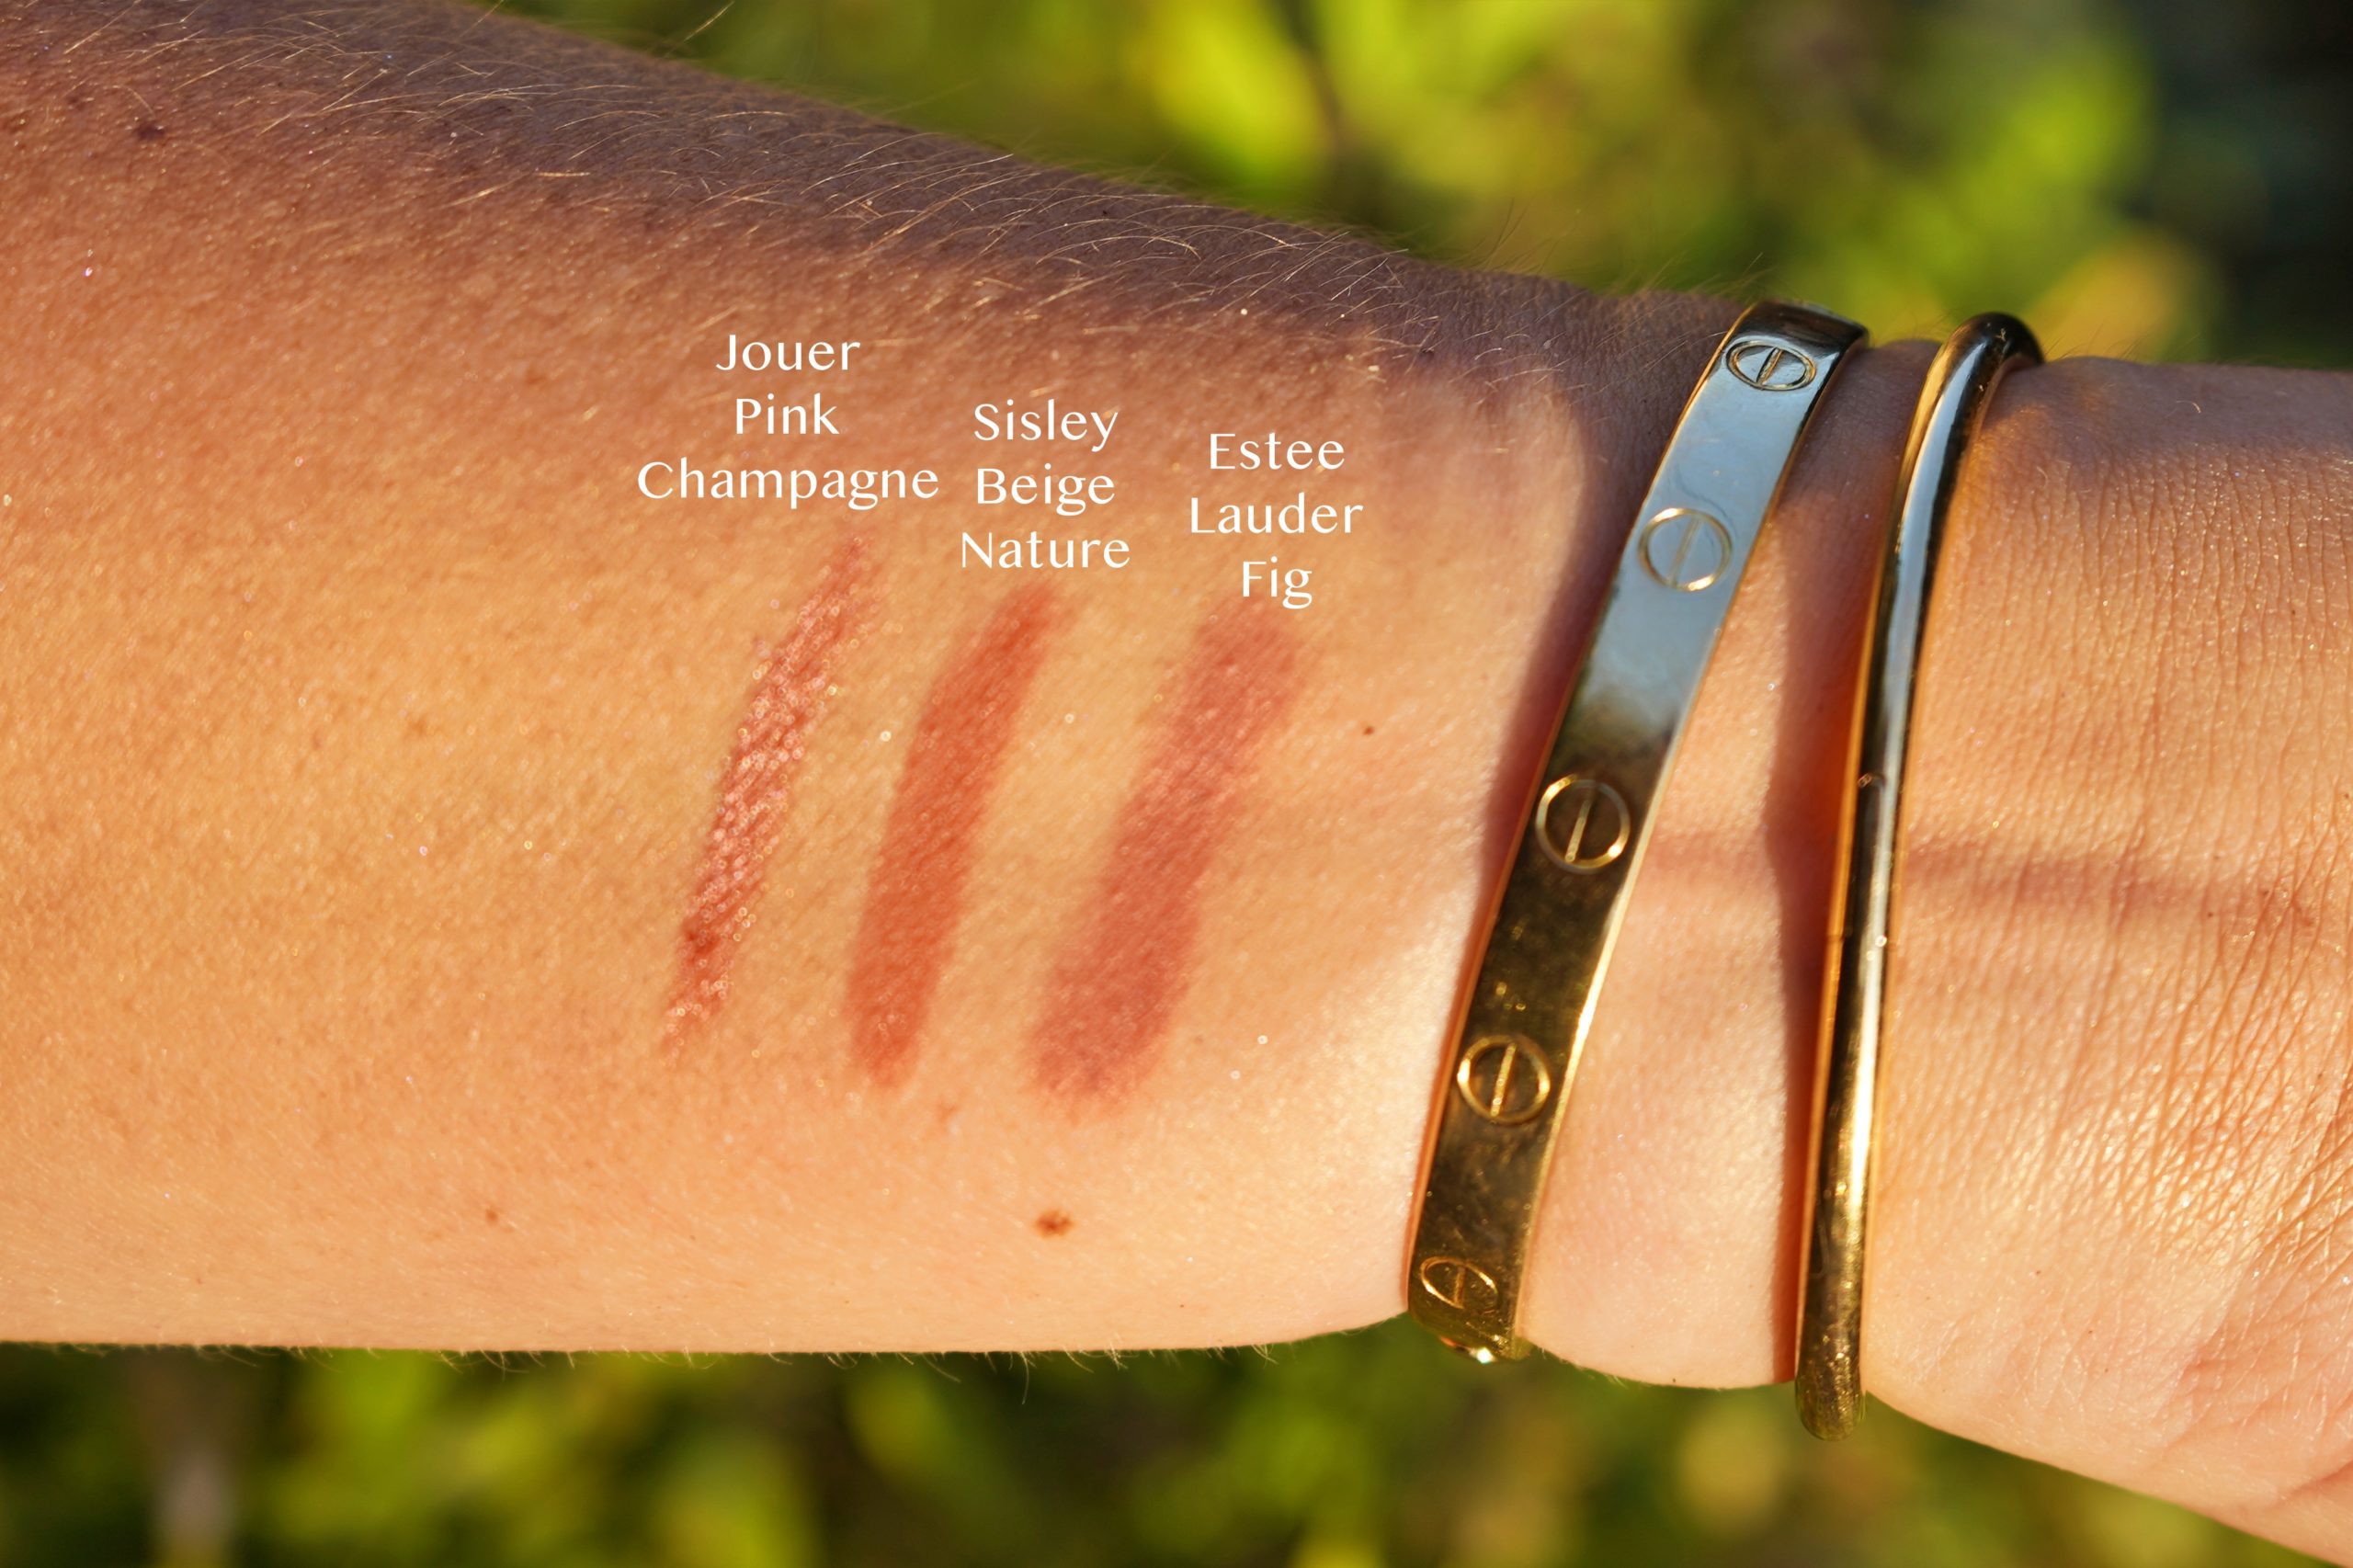 Lip pencil swatches in direct sunlight | An Epic Holiday Gift Guide